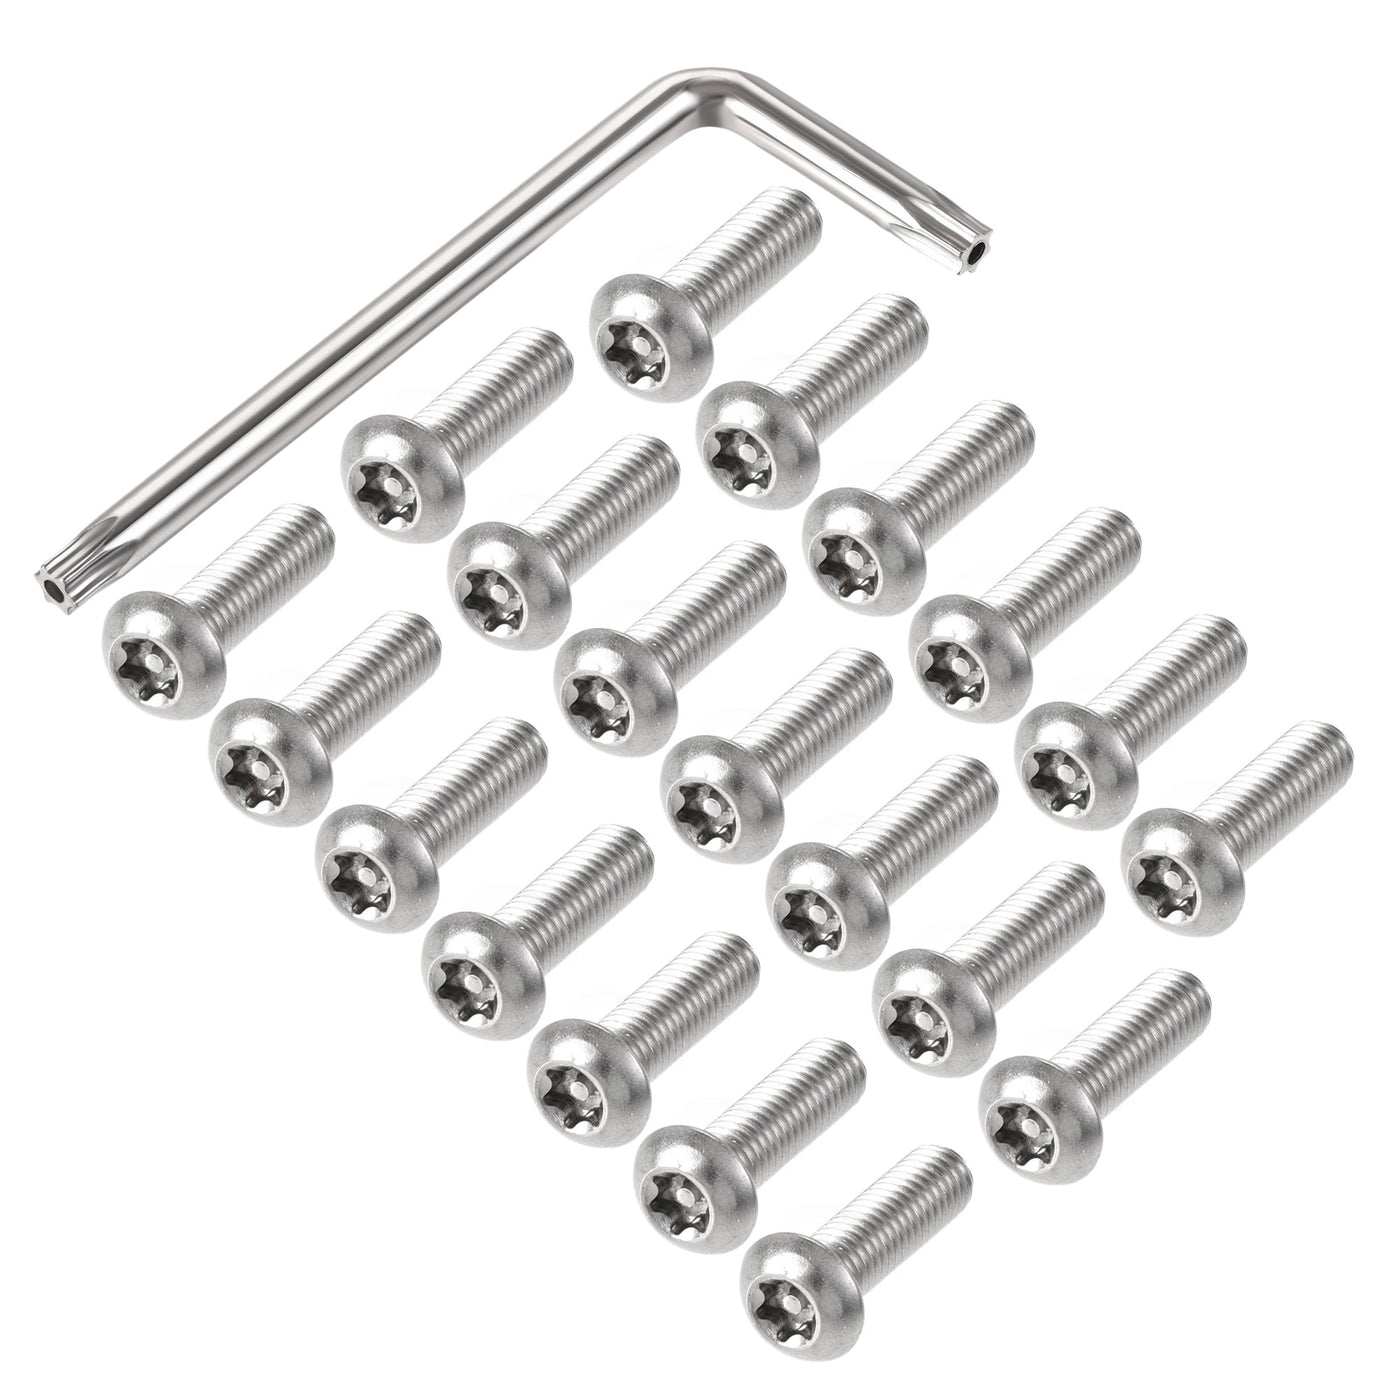 uxcell Uxcell M8x25mm Torx Security Machine Screw 20pcs Pan Head Screws with T40 L-Type Wrench